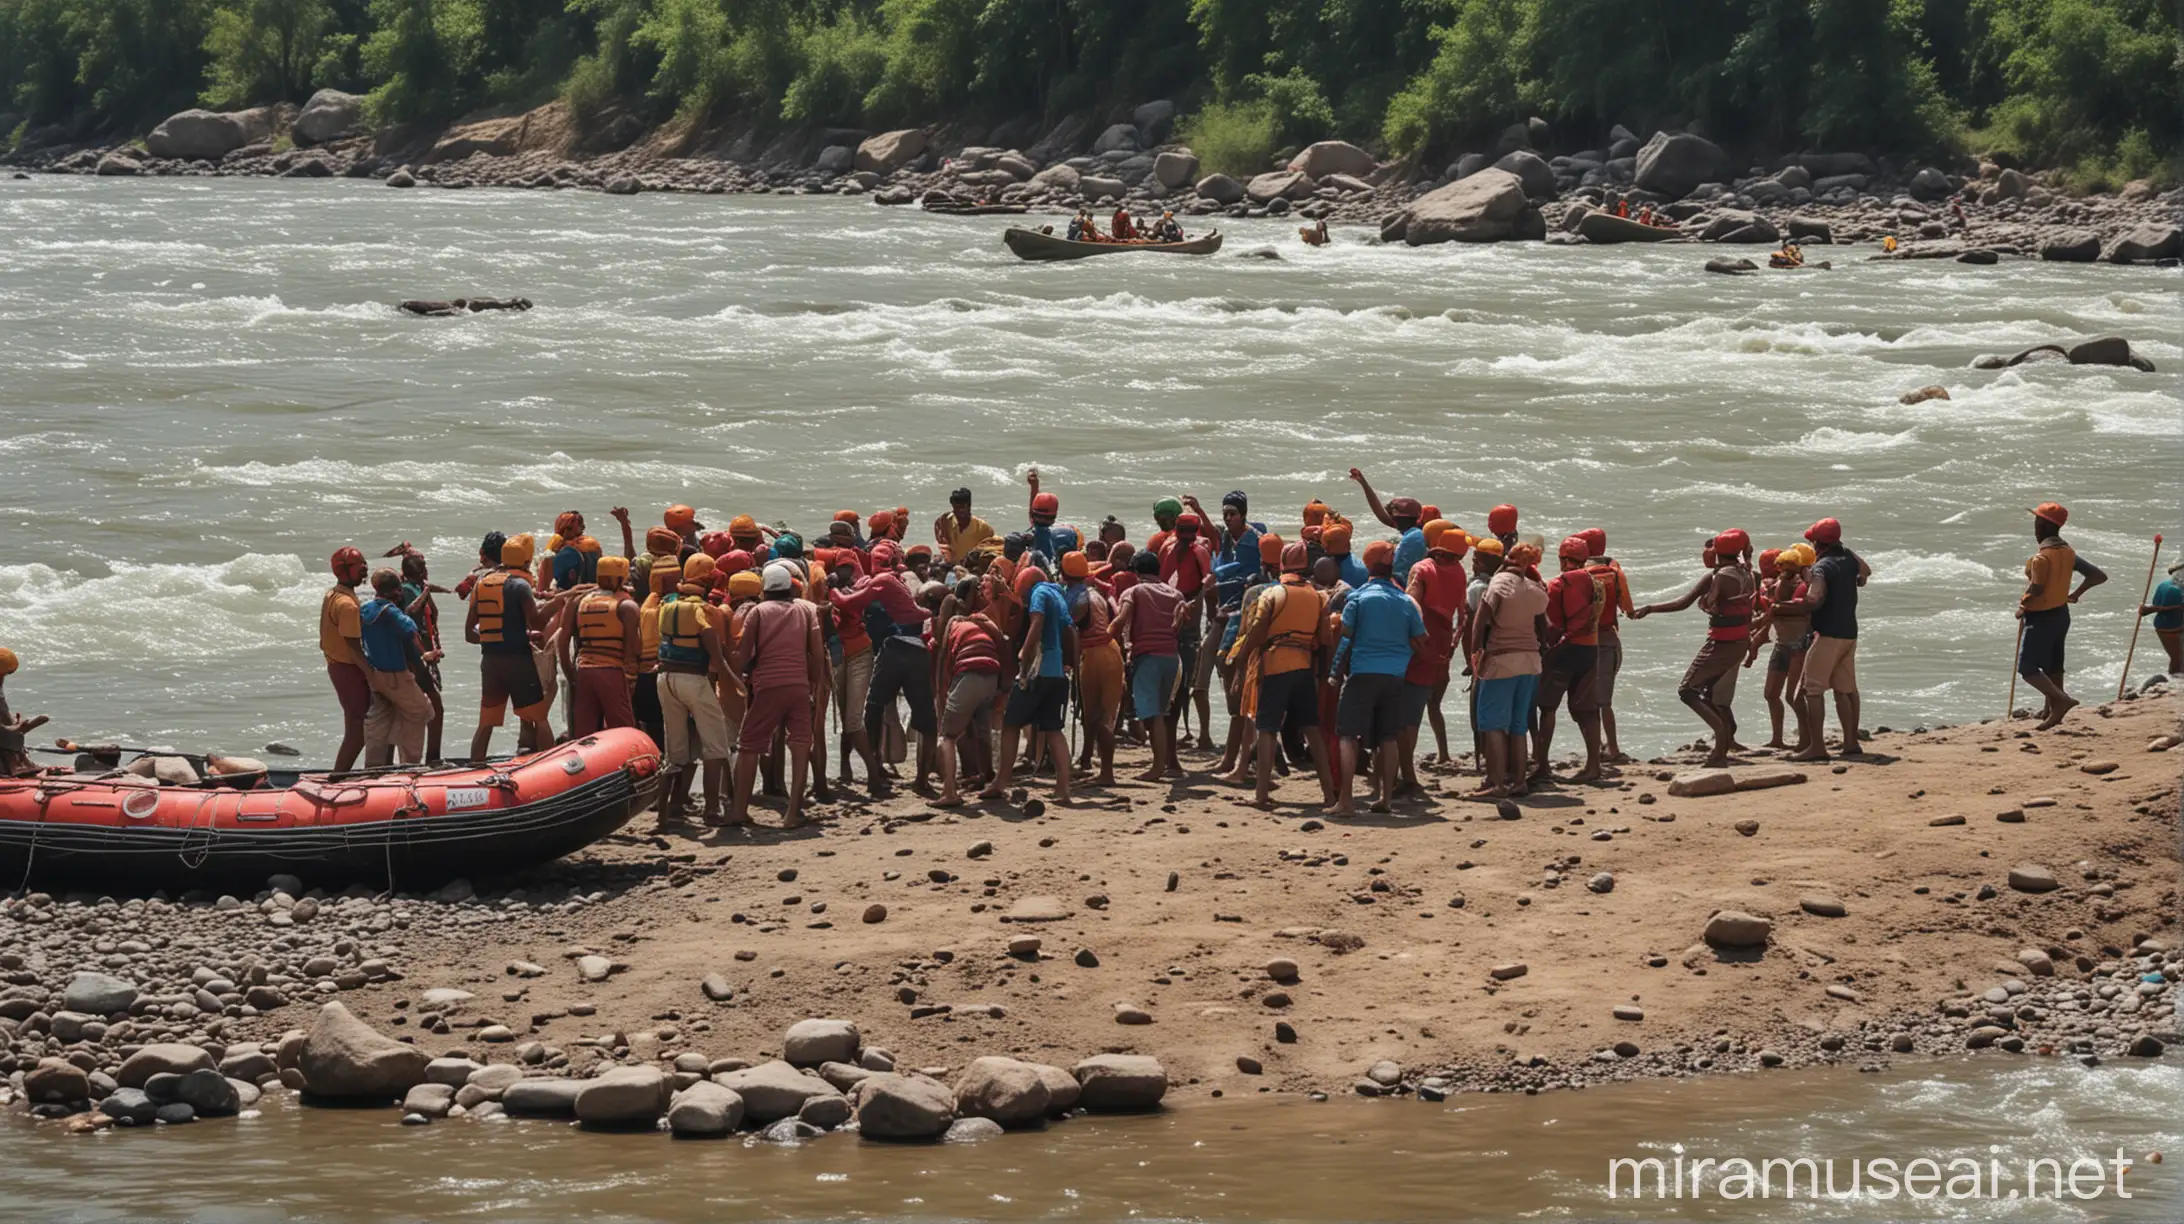 Indian People Rafting in Traditional Attire Along River Bank